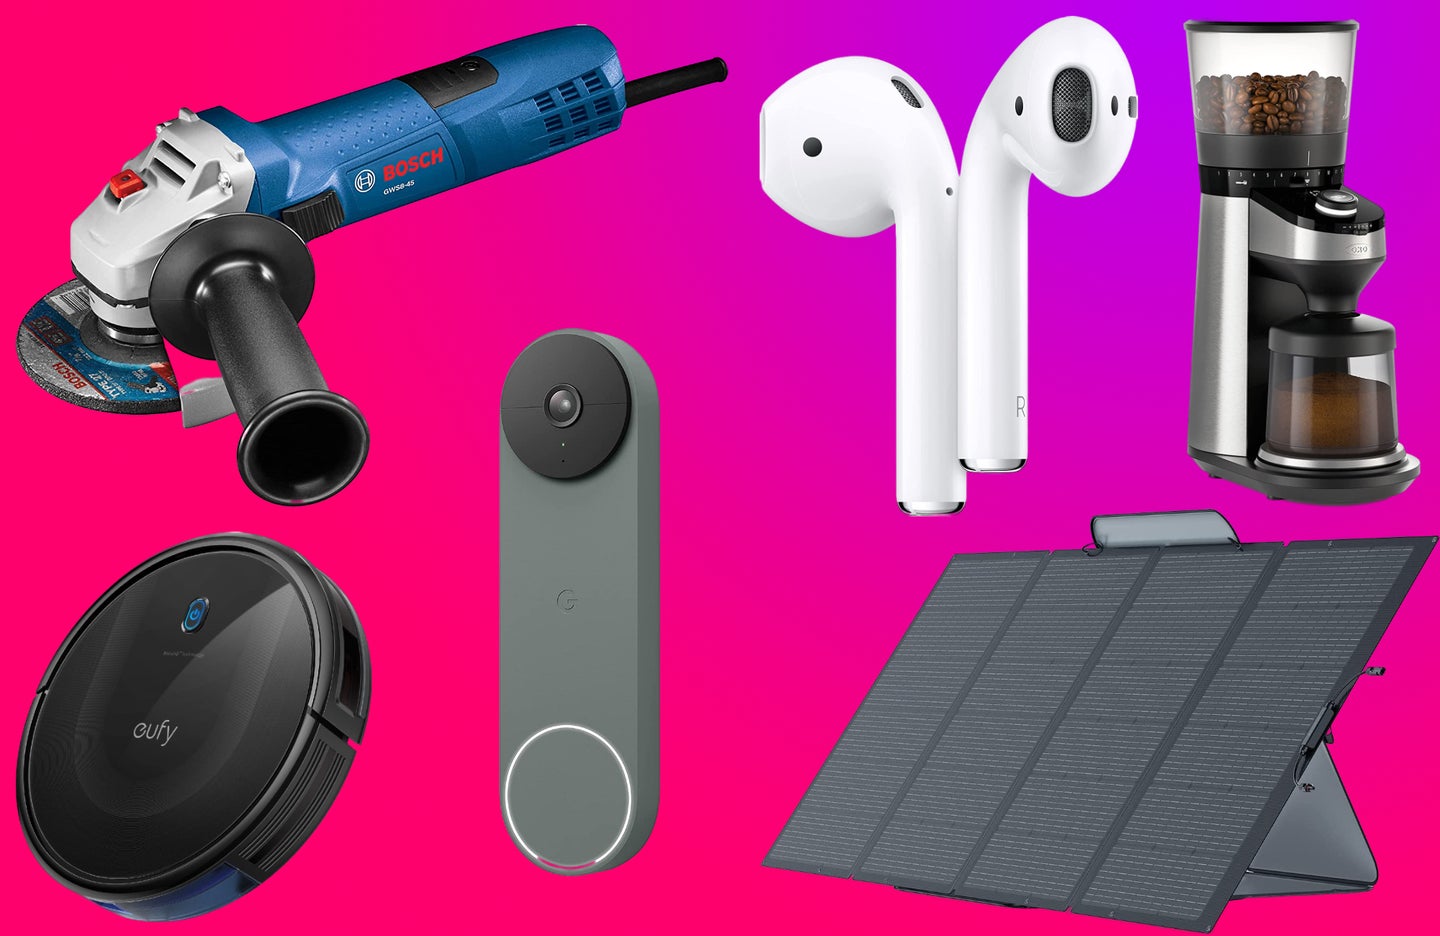 The best post Prime Day deals